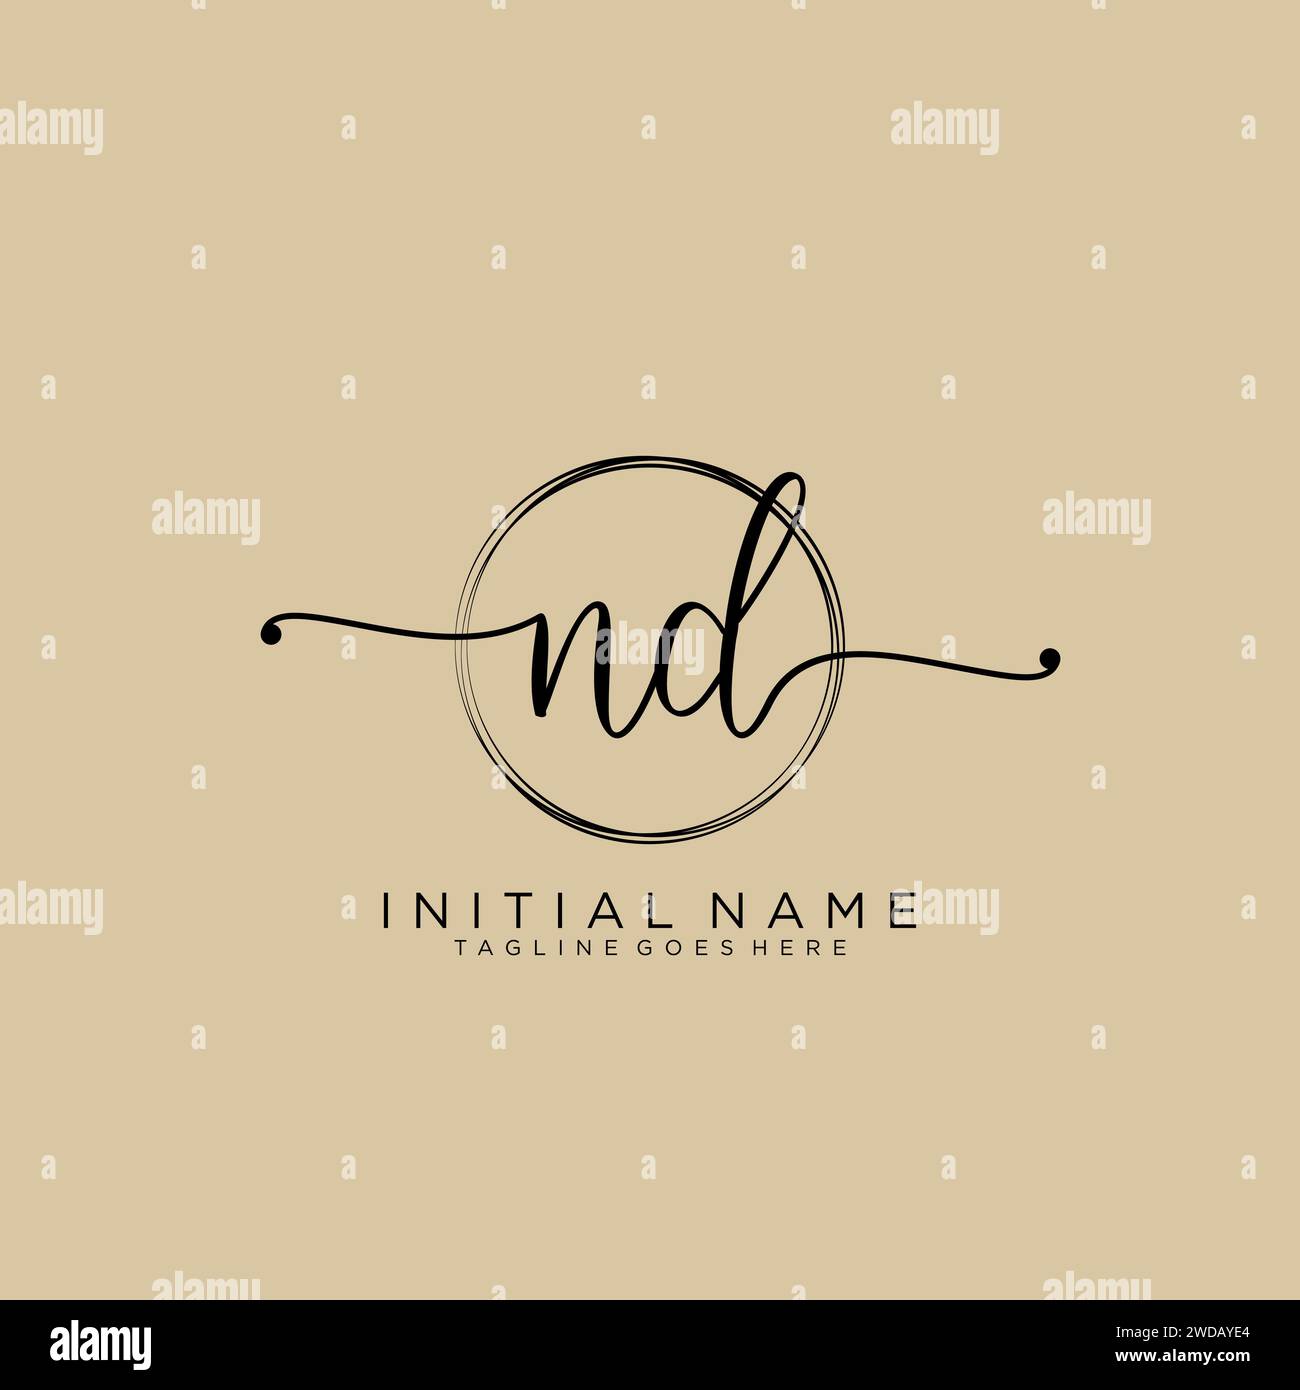 ND Initial handwriting logo with circle Stock Vector